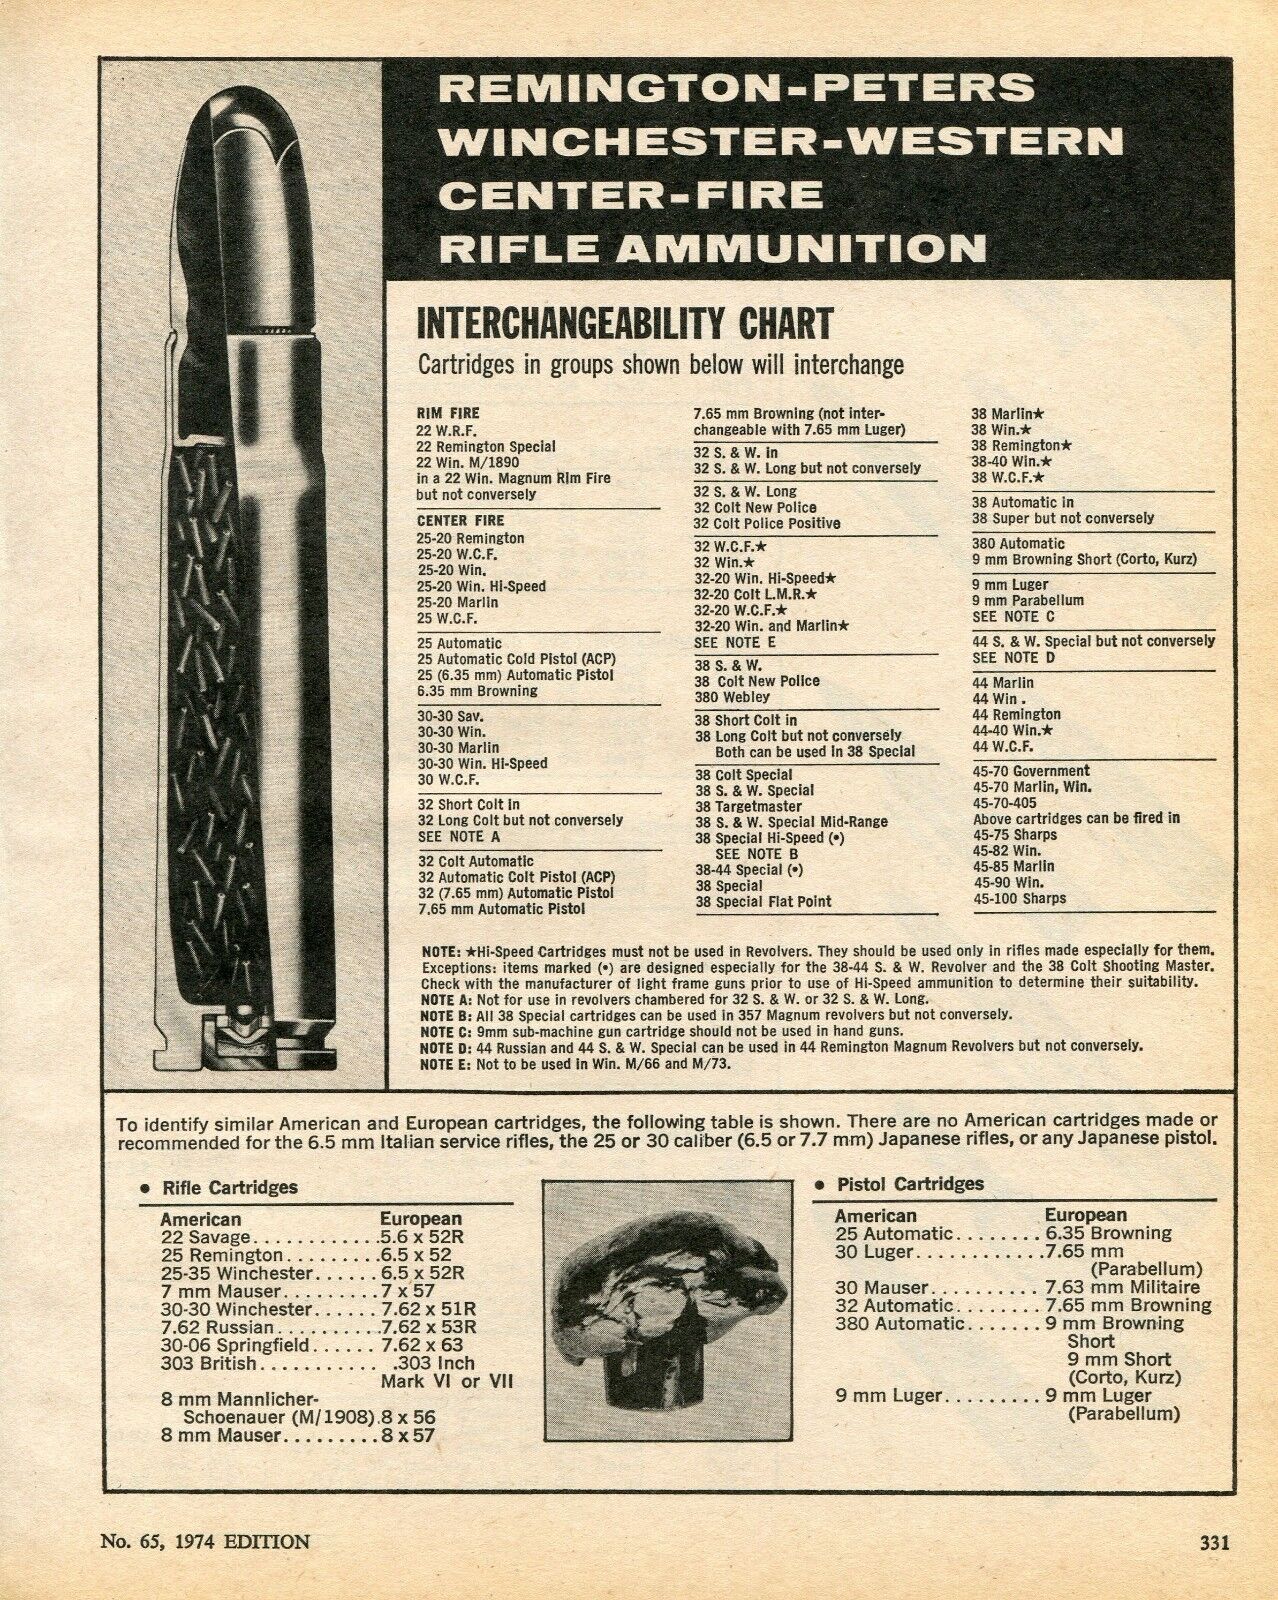 1974 Print Ad Remington Peters Winchester Western Rifle Interchangeability Chart